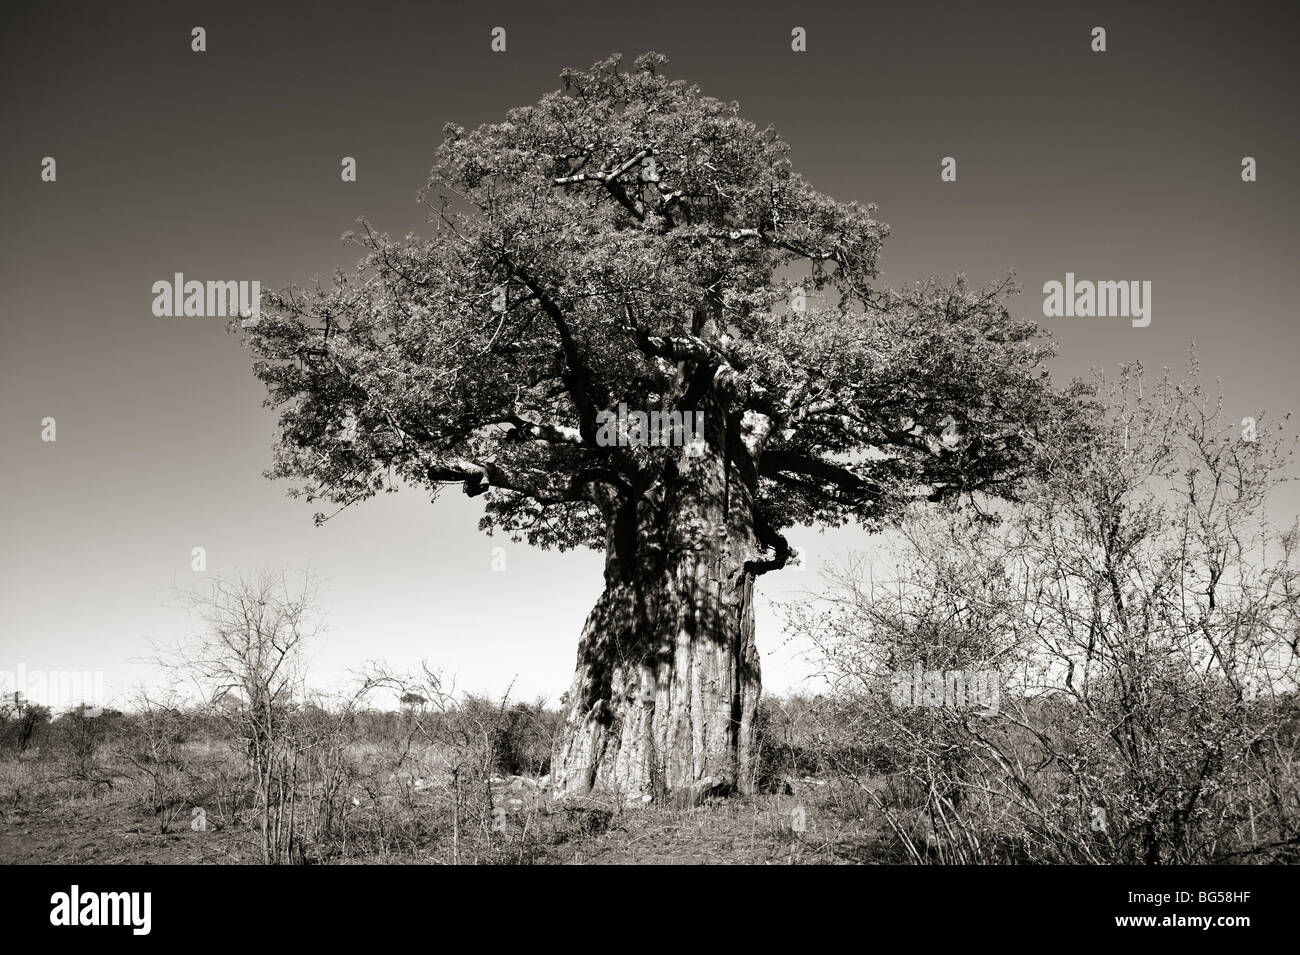 Baobab Tree. Kruger National Park. South Africa.  A giant baobab tree in the African bush Stock Photo